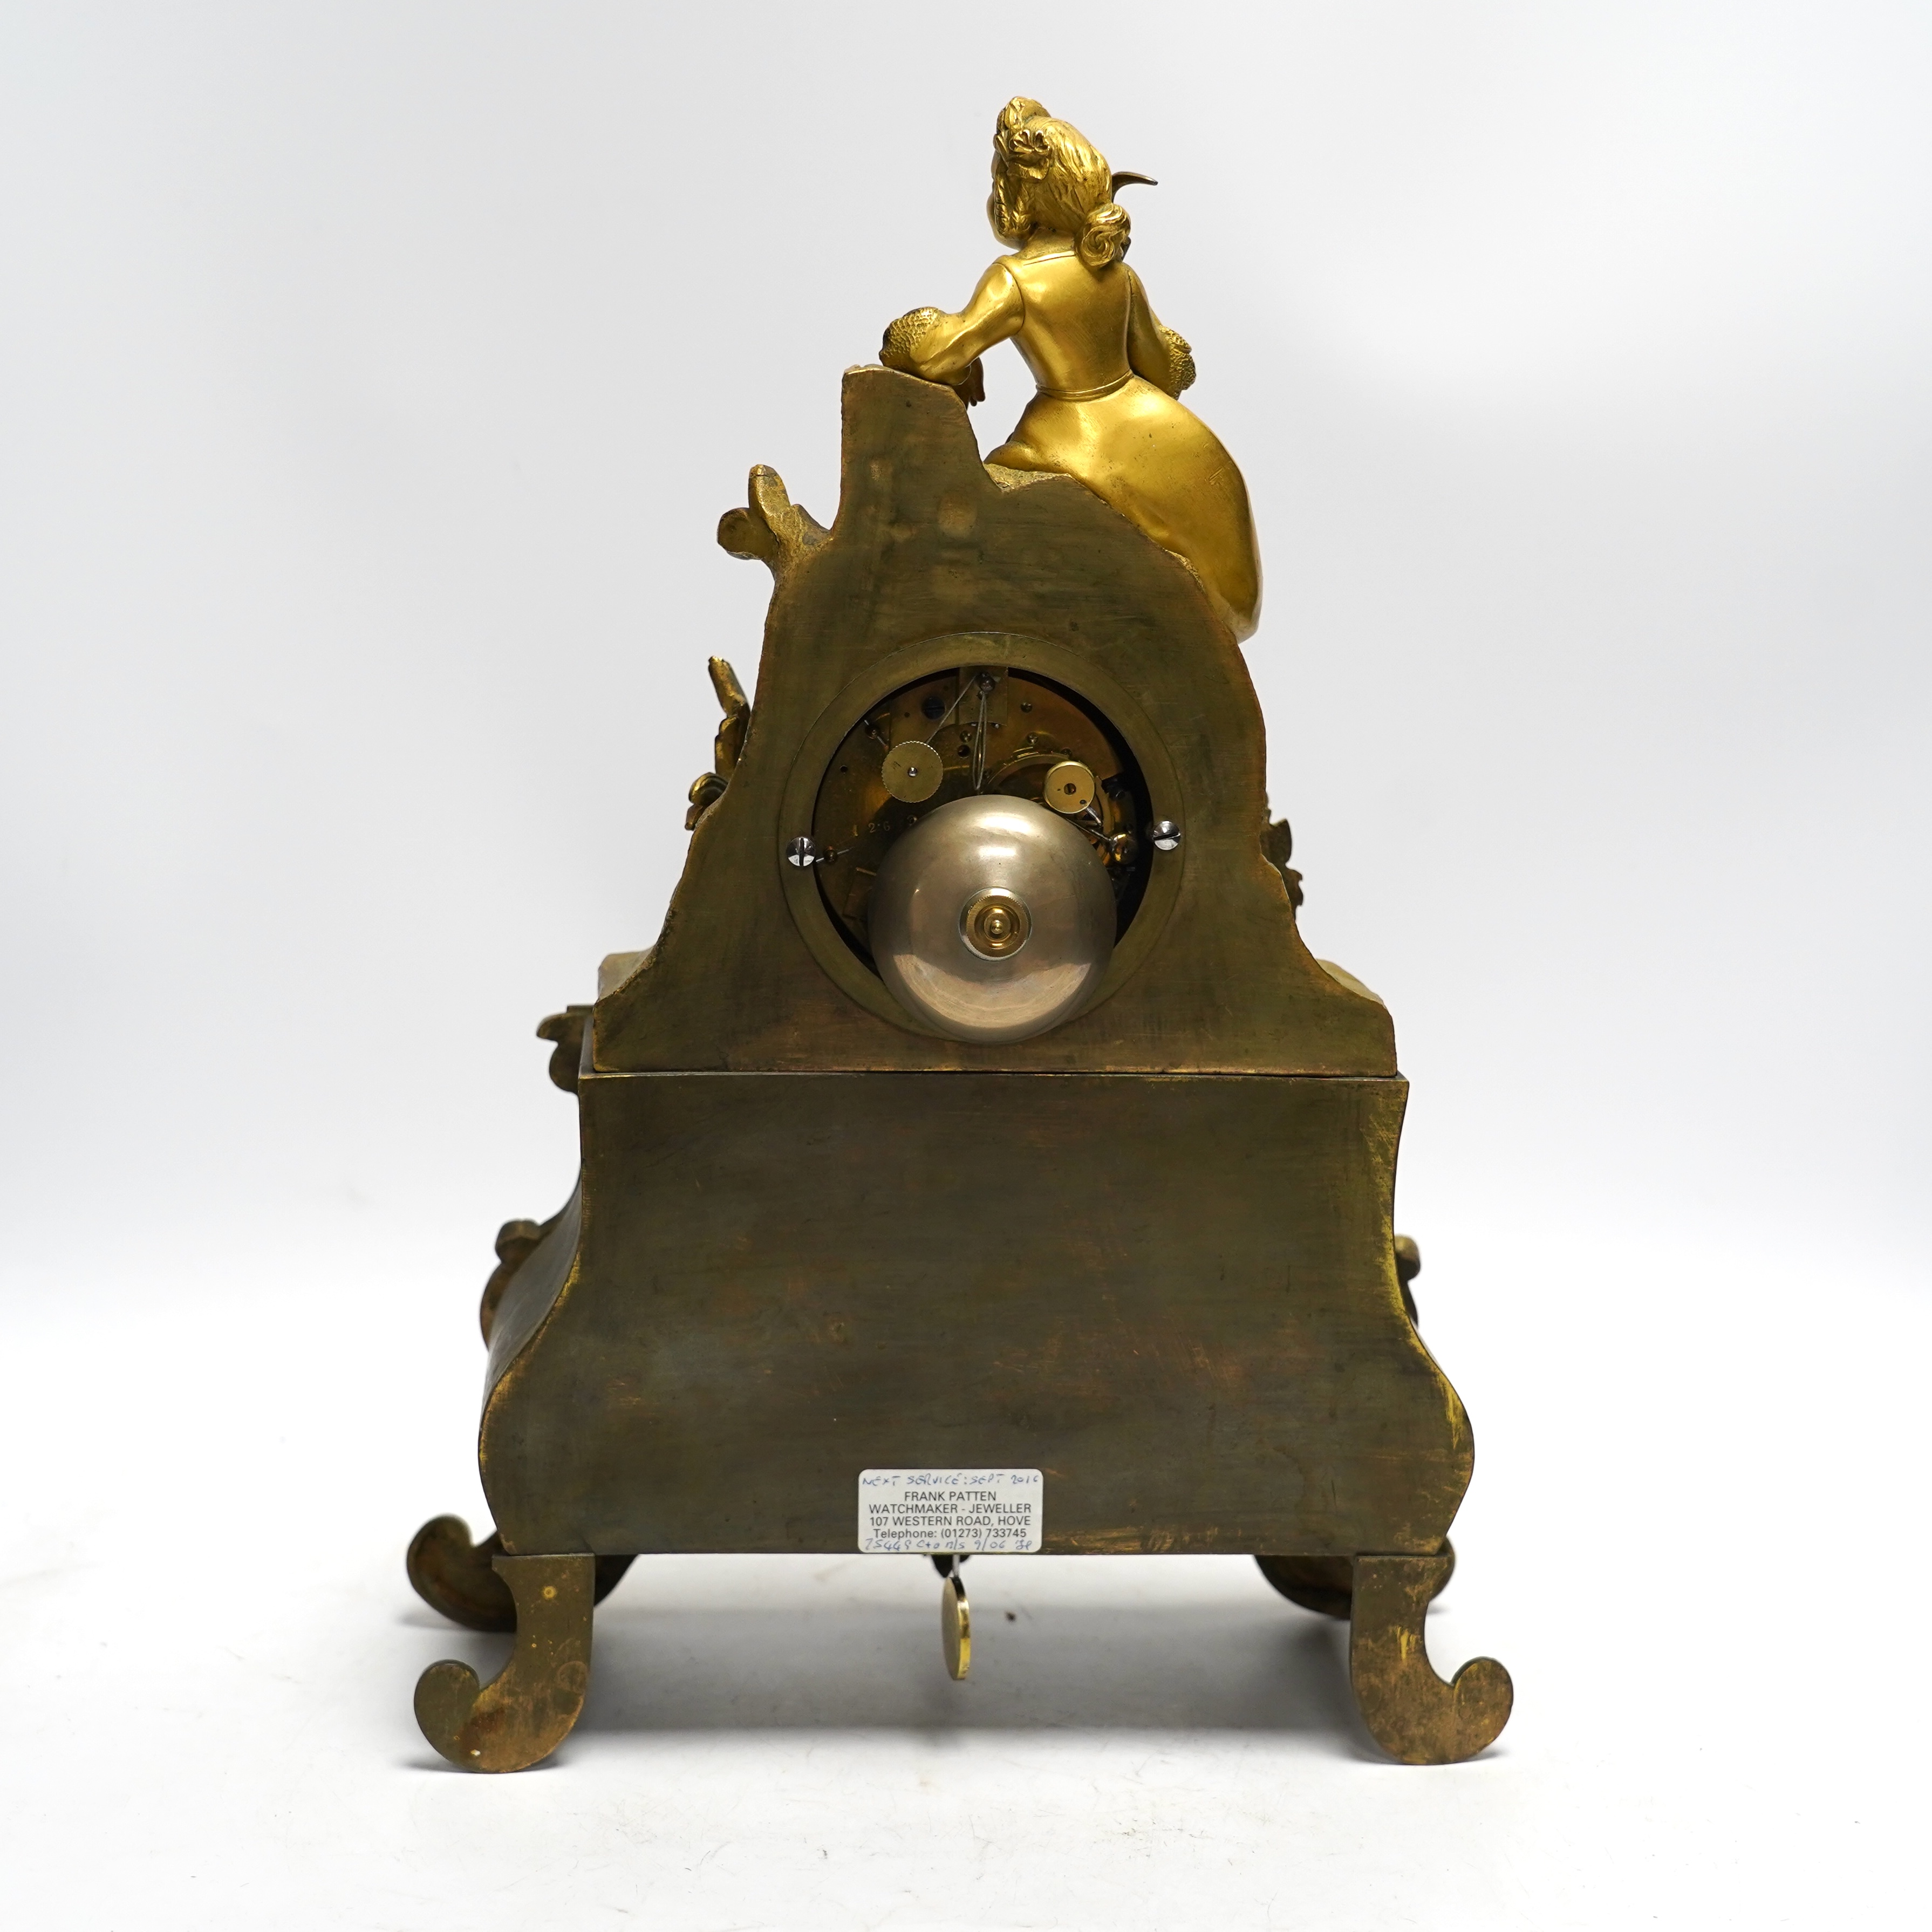 A mid 19th century French ormolu figural mounted clock with silk suspension, with key, 36cm